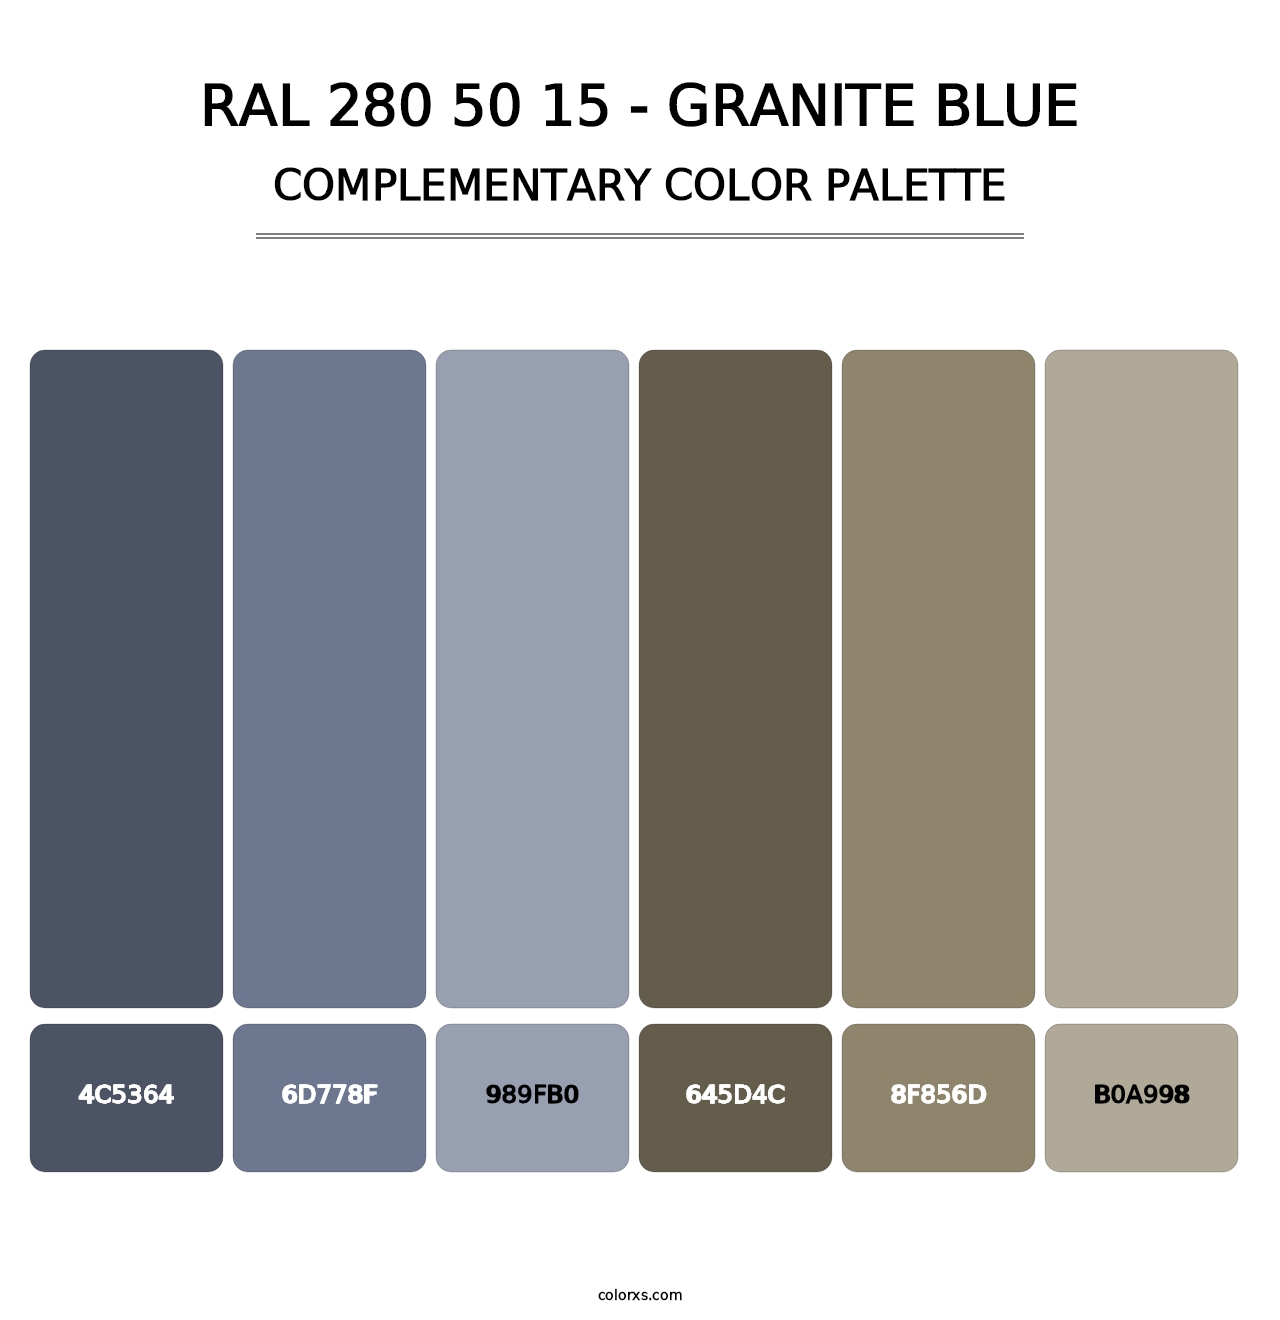 RAL 280 50 15 - Granite Blue - Complementary Color Palette